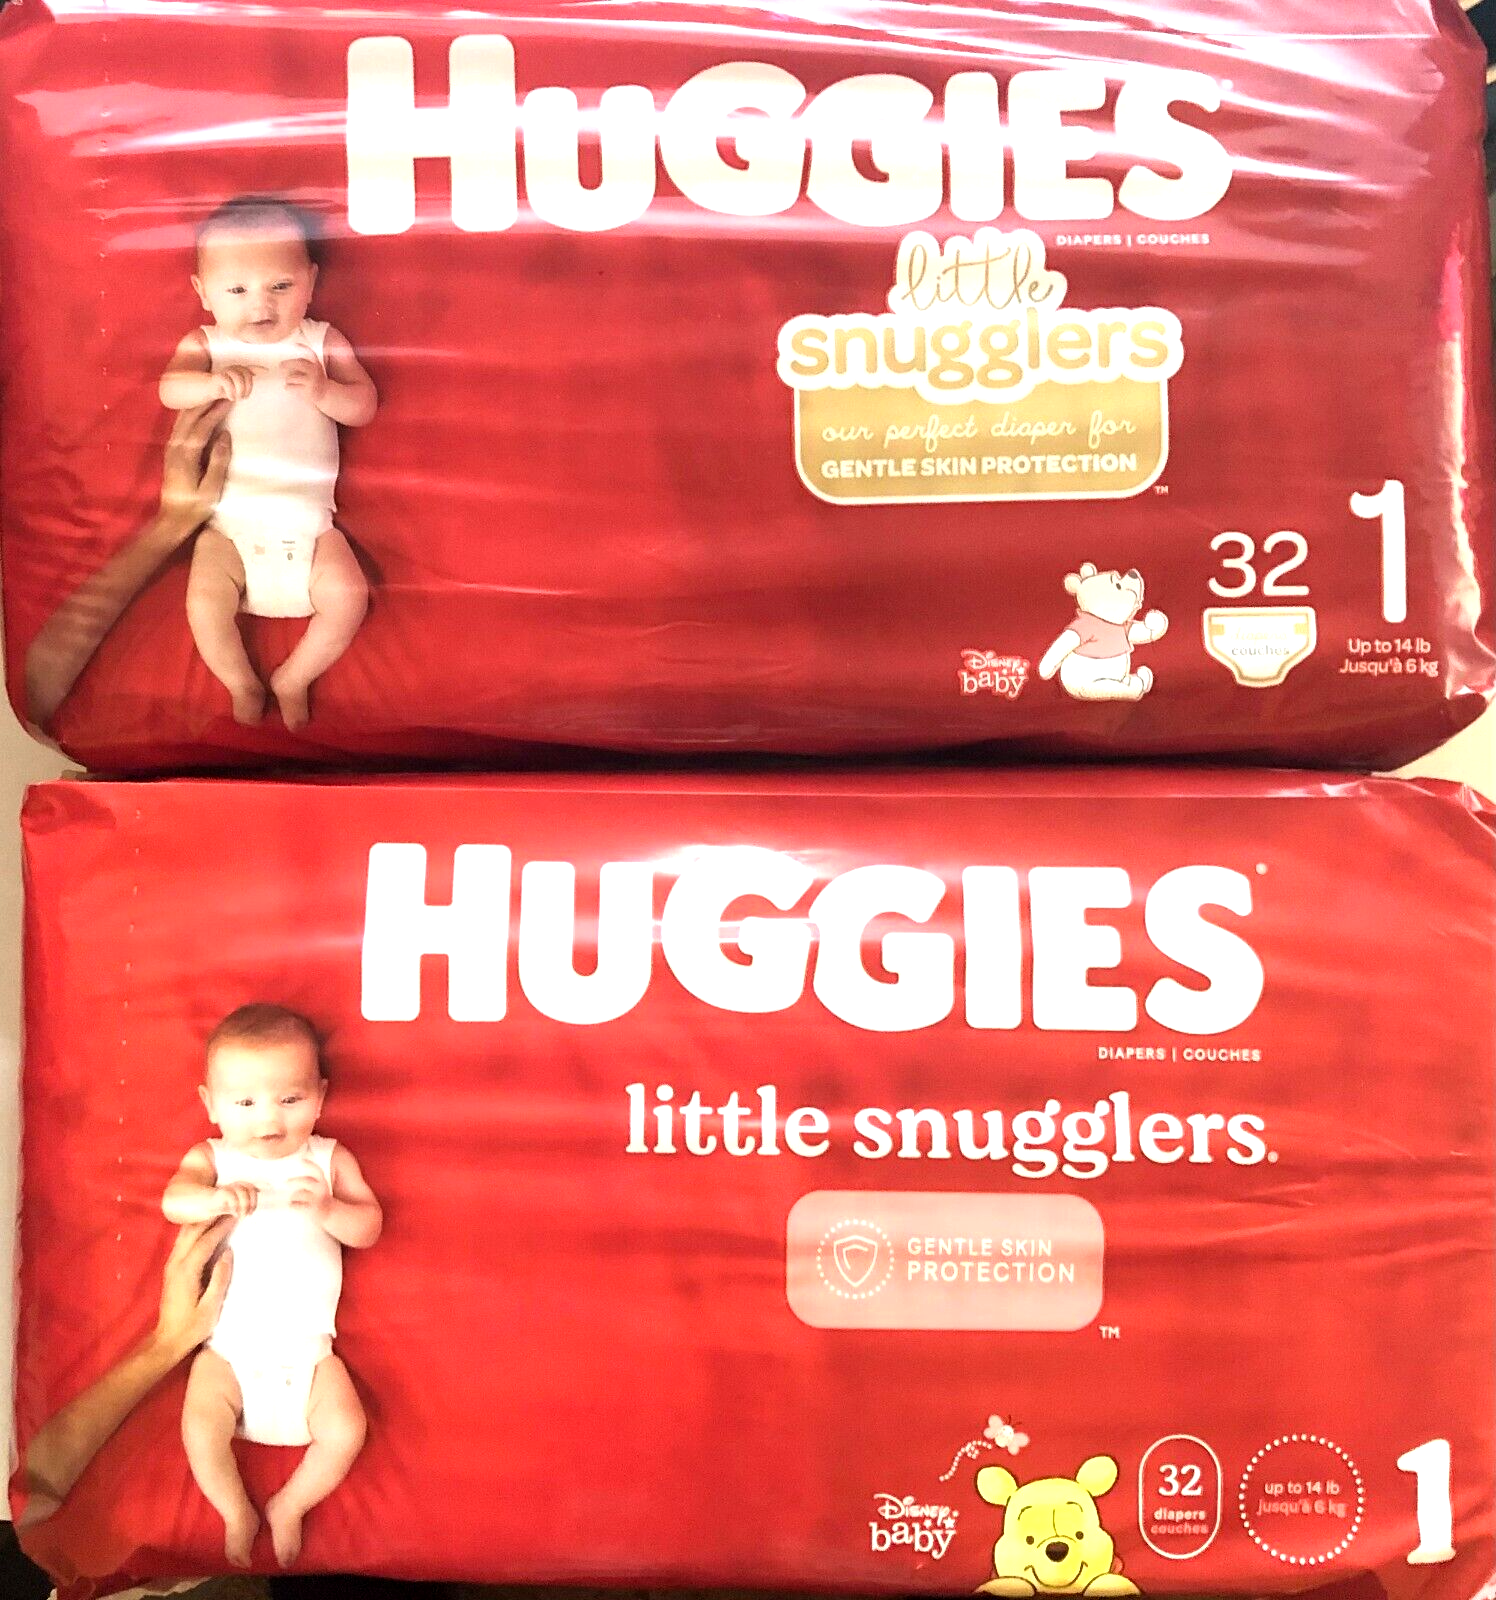 Huggies Little Snugglers Baby Diapers, Size 1, 32 Ct Up to 14 lb (2 Lot=64 Count Huggies Huggies Little Snugglers